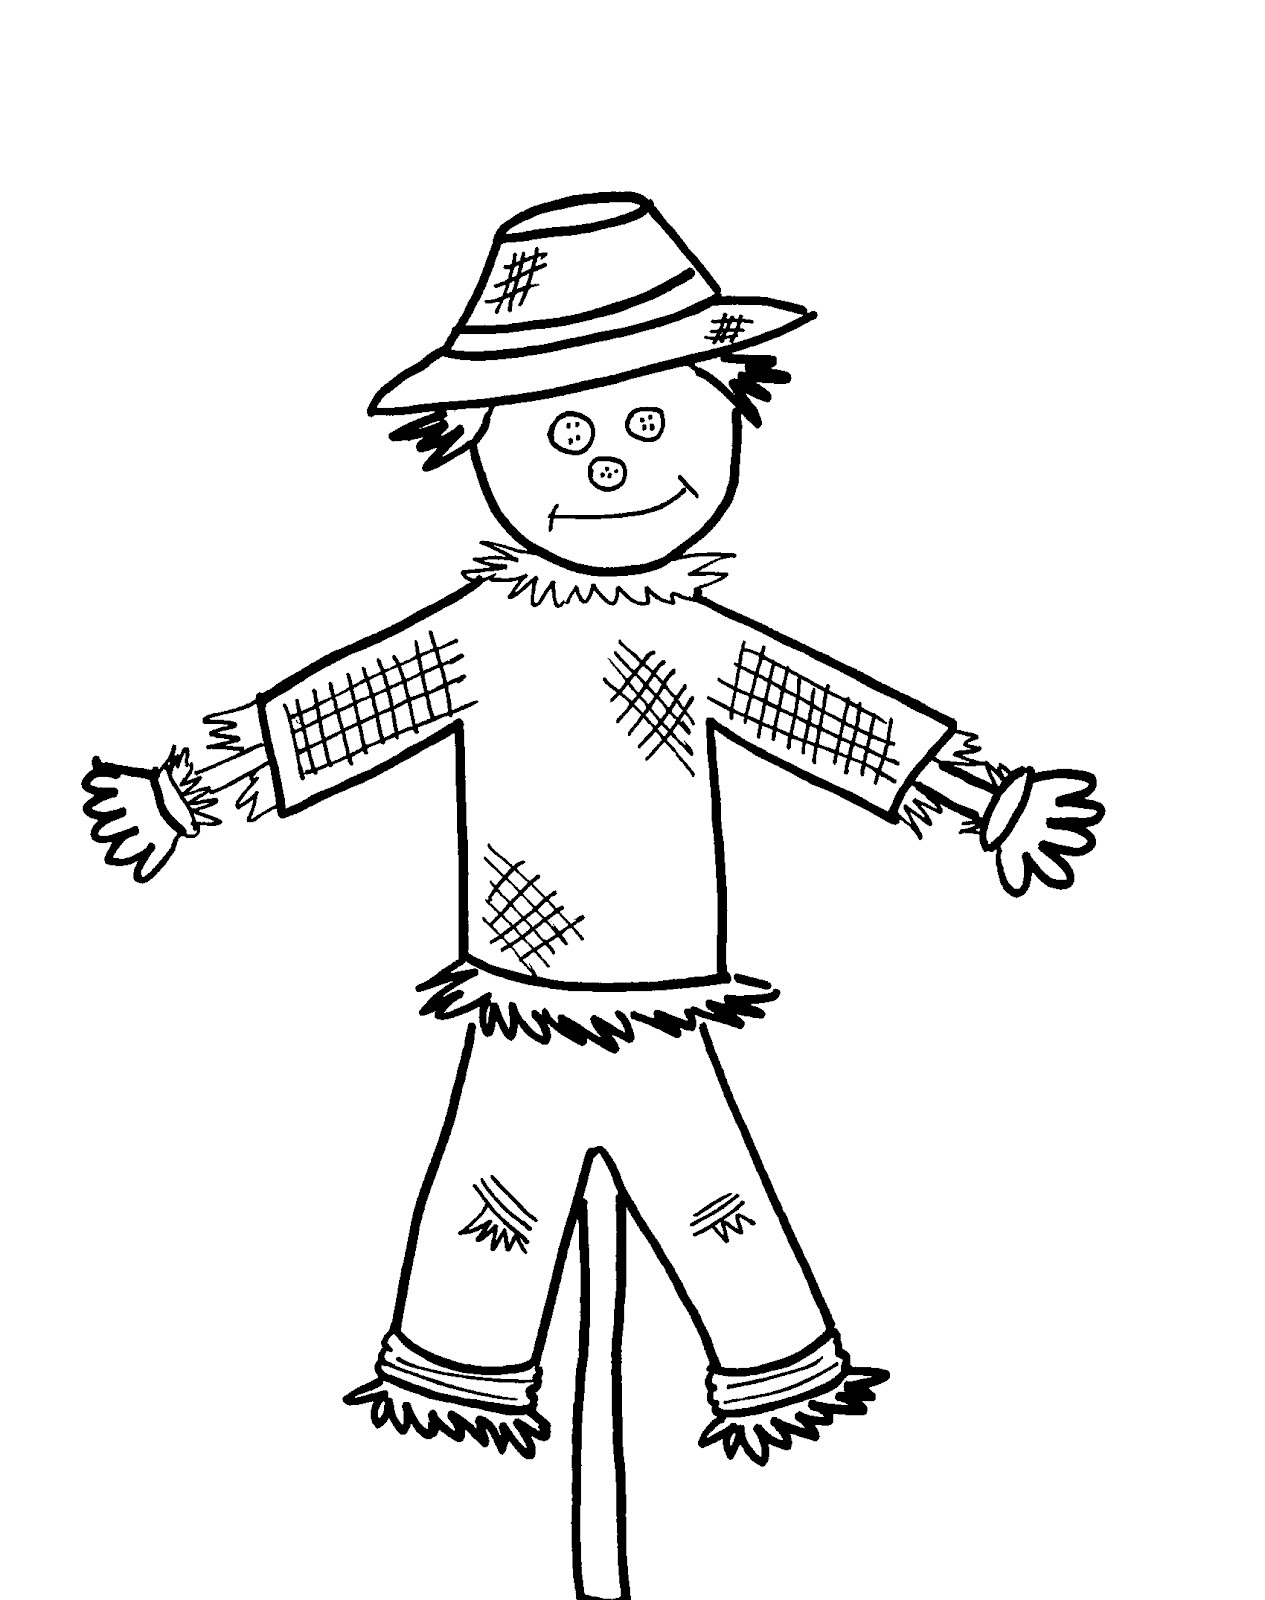 Scarecrow clipart black and white.